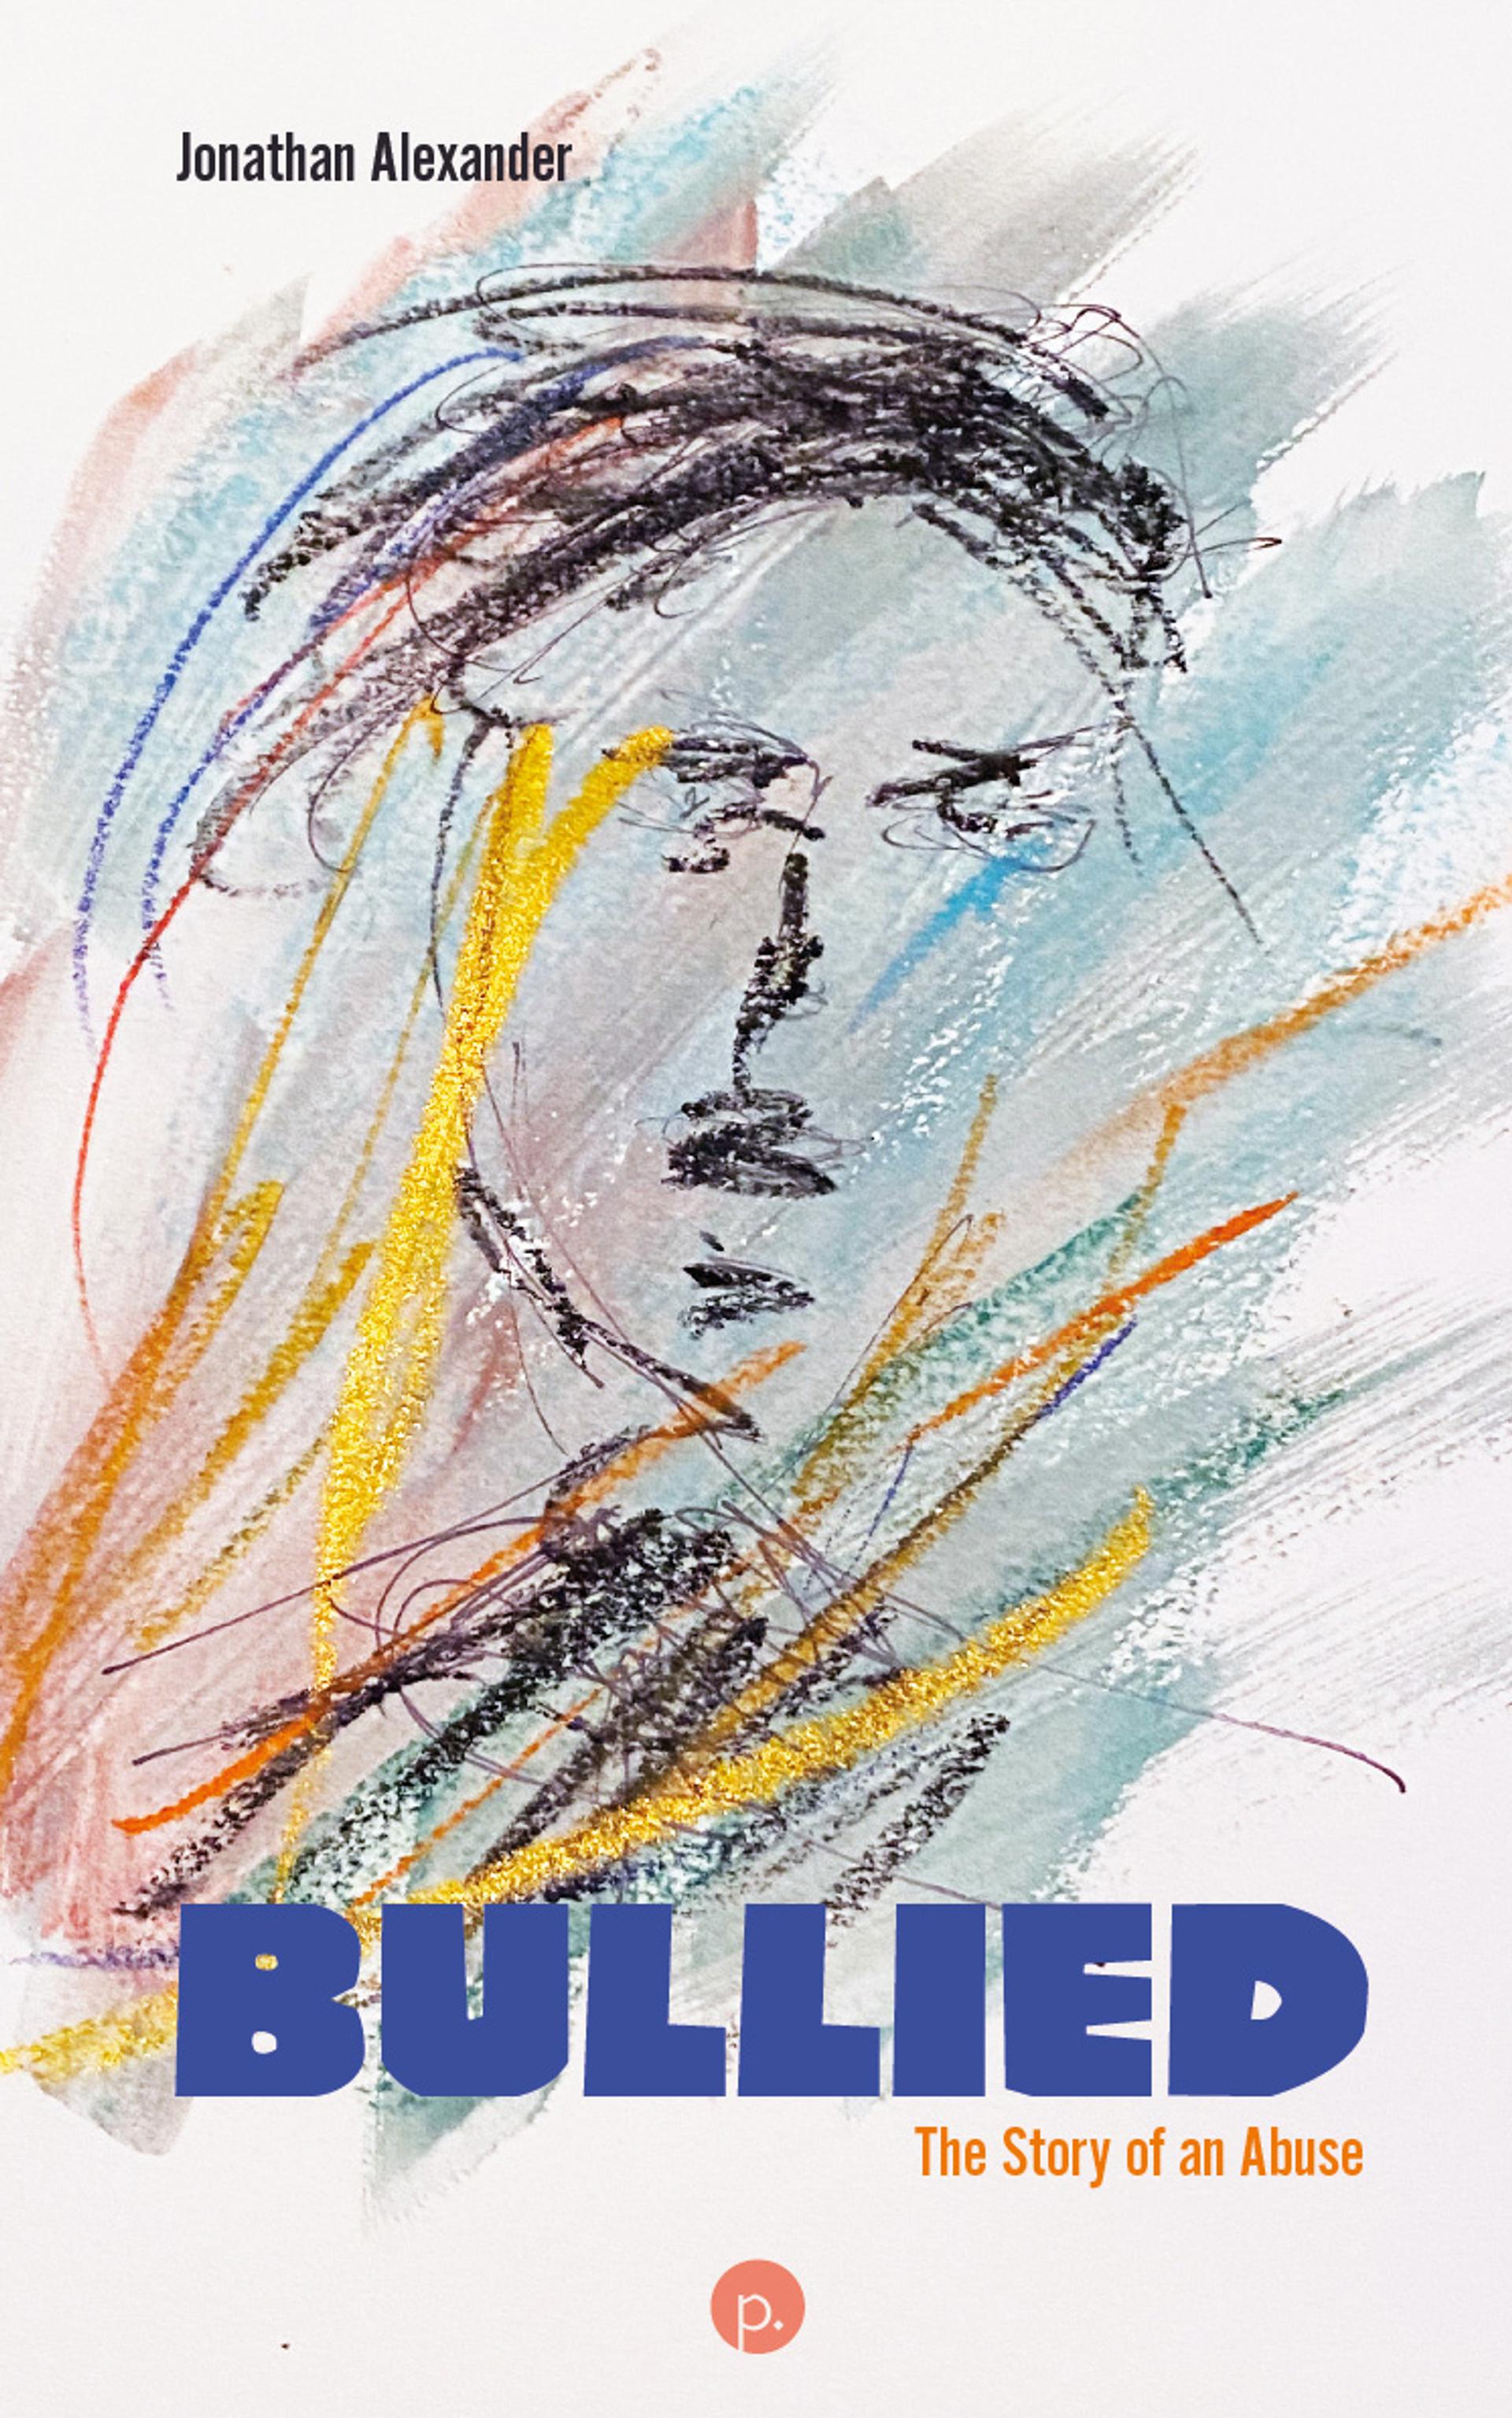 Cover of book titled Bullied: The Story of an Abuse